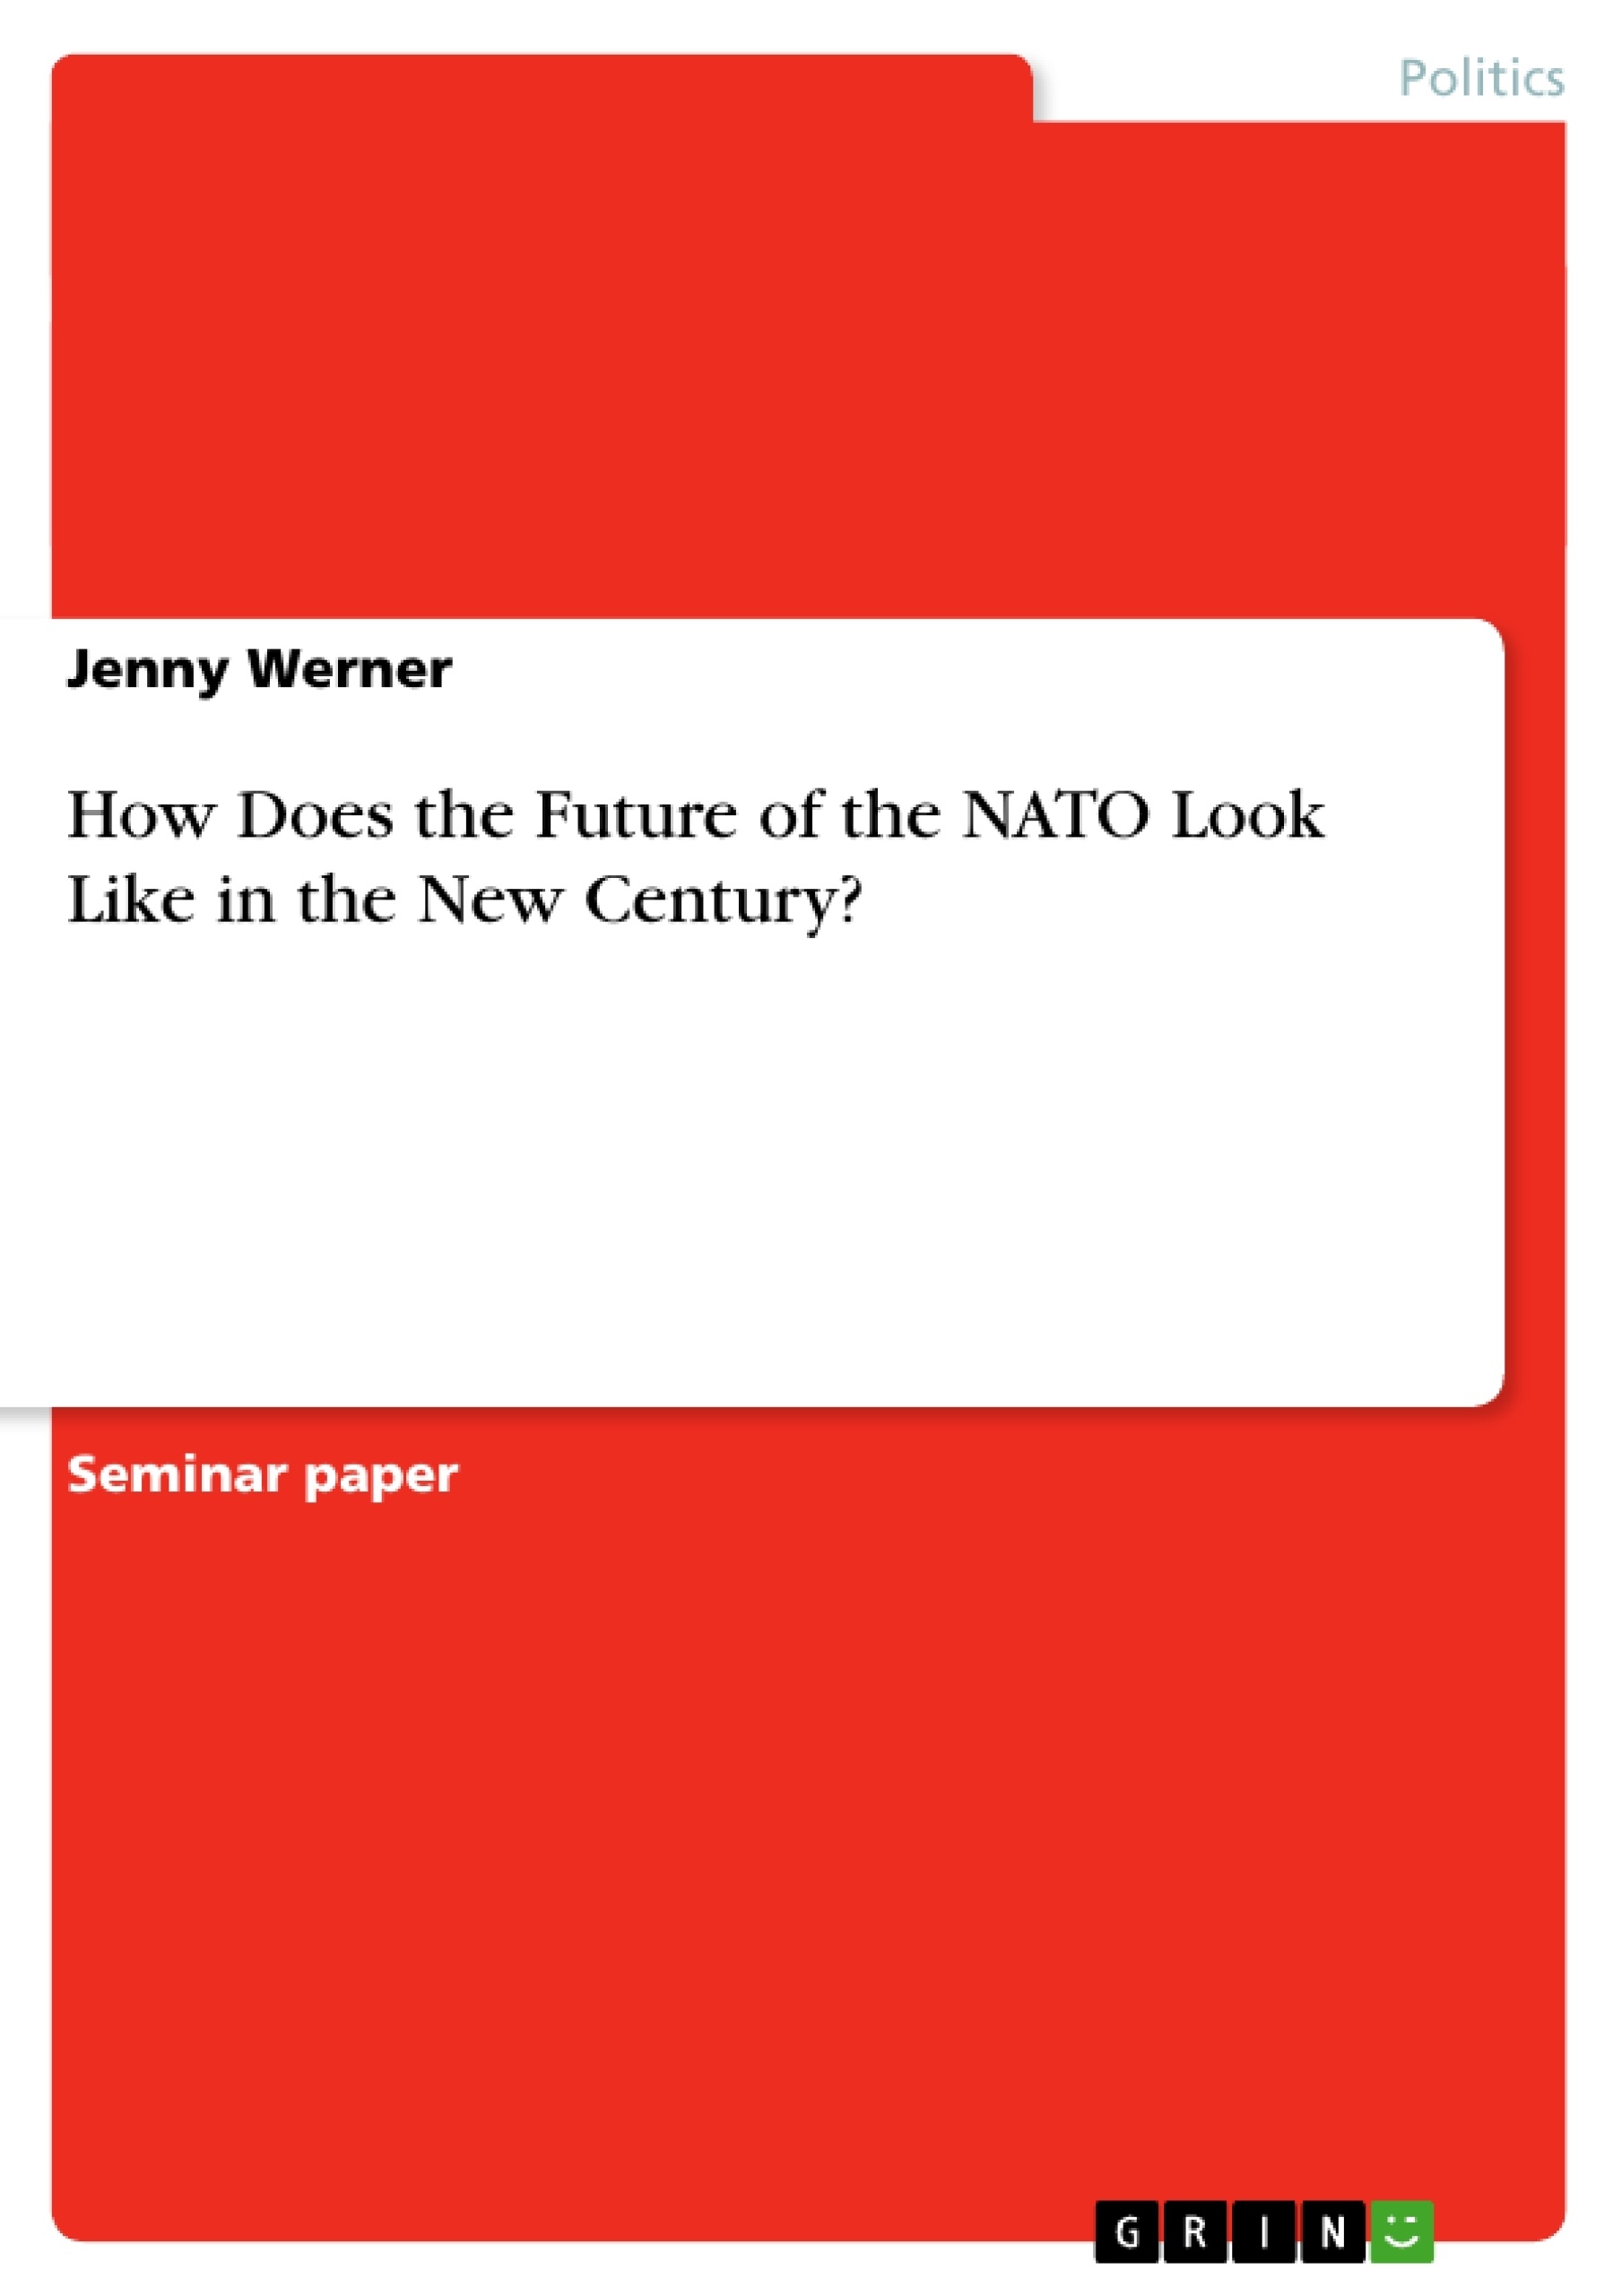 Title: How Does the Future of the NATO Look Like in the New Century?